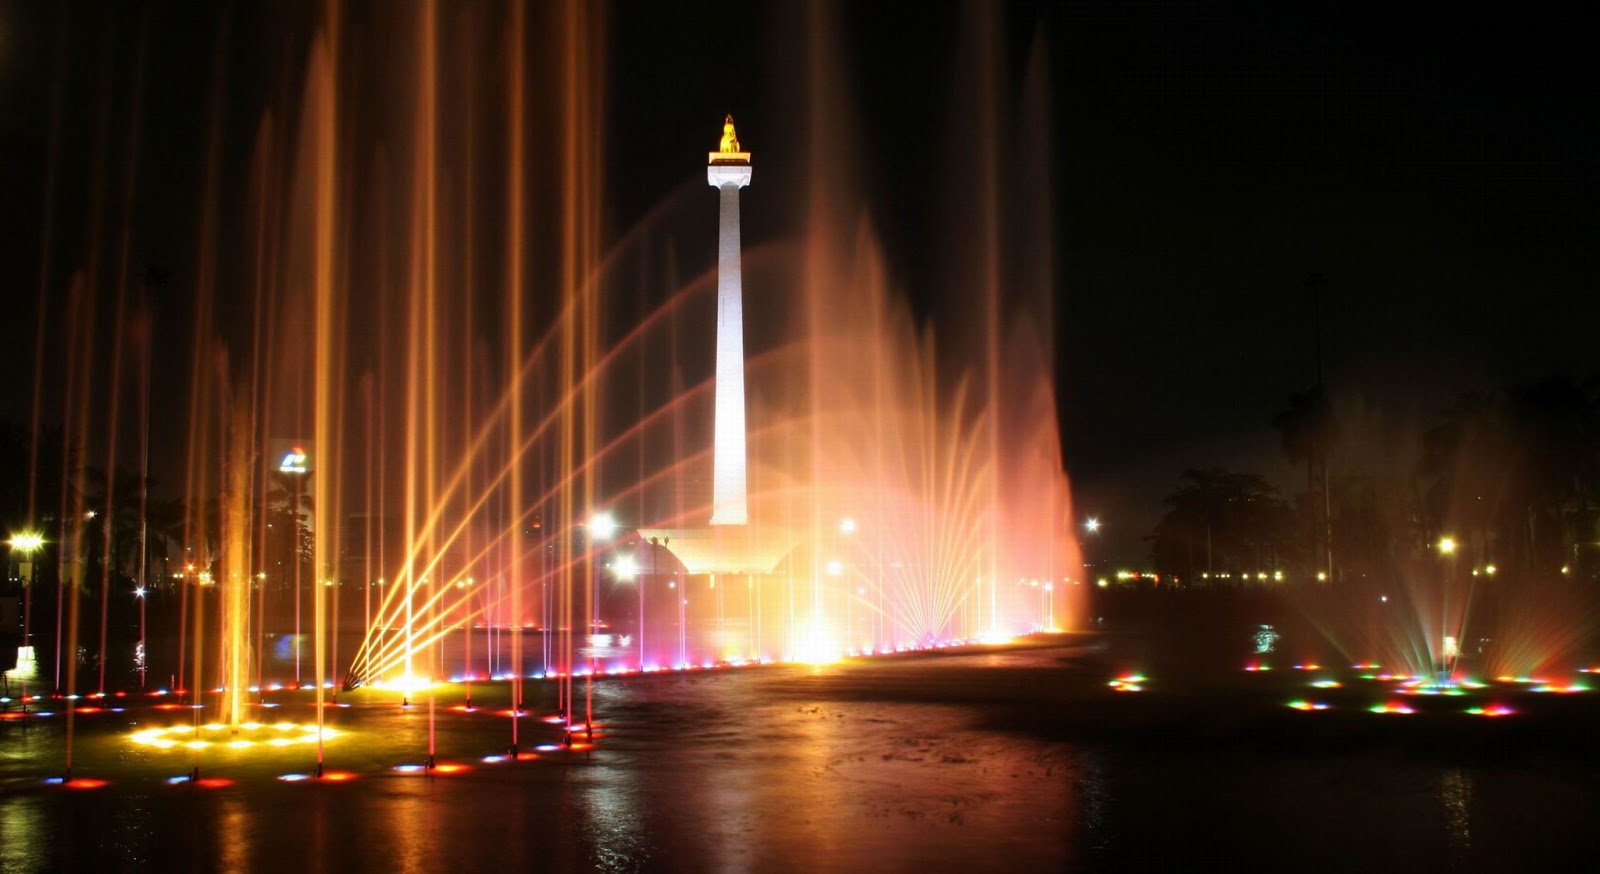 images/places/structures/4/Monas-3